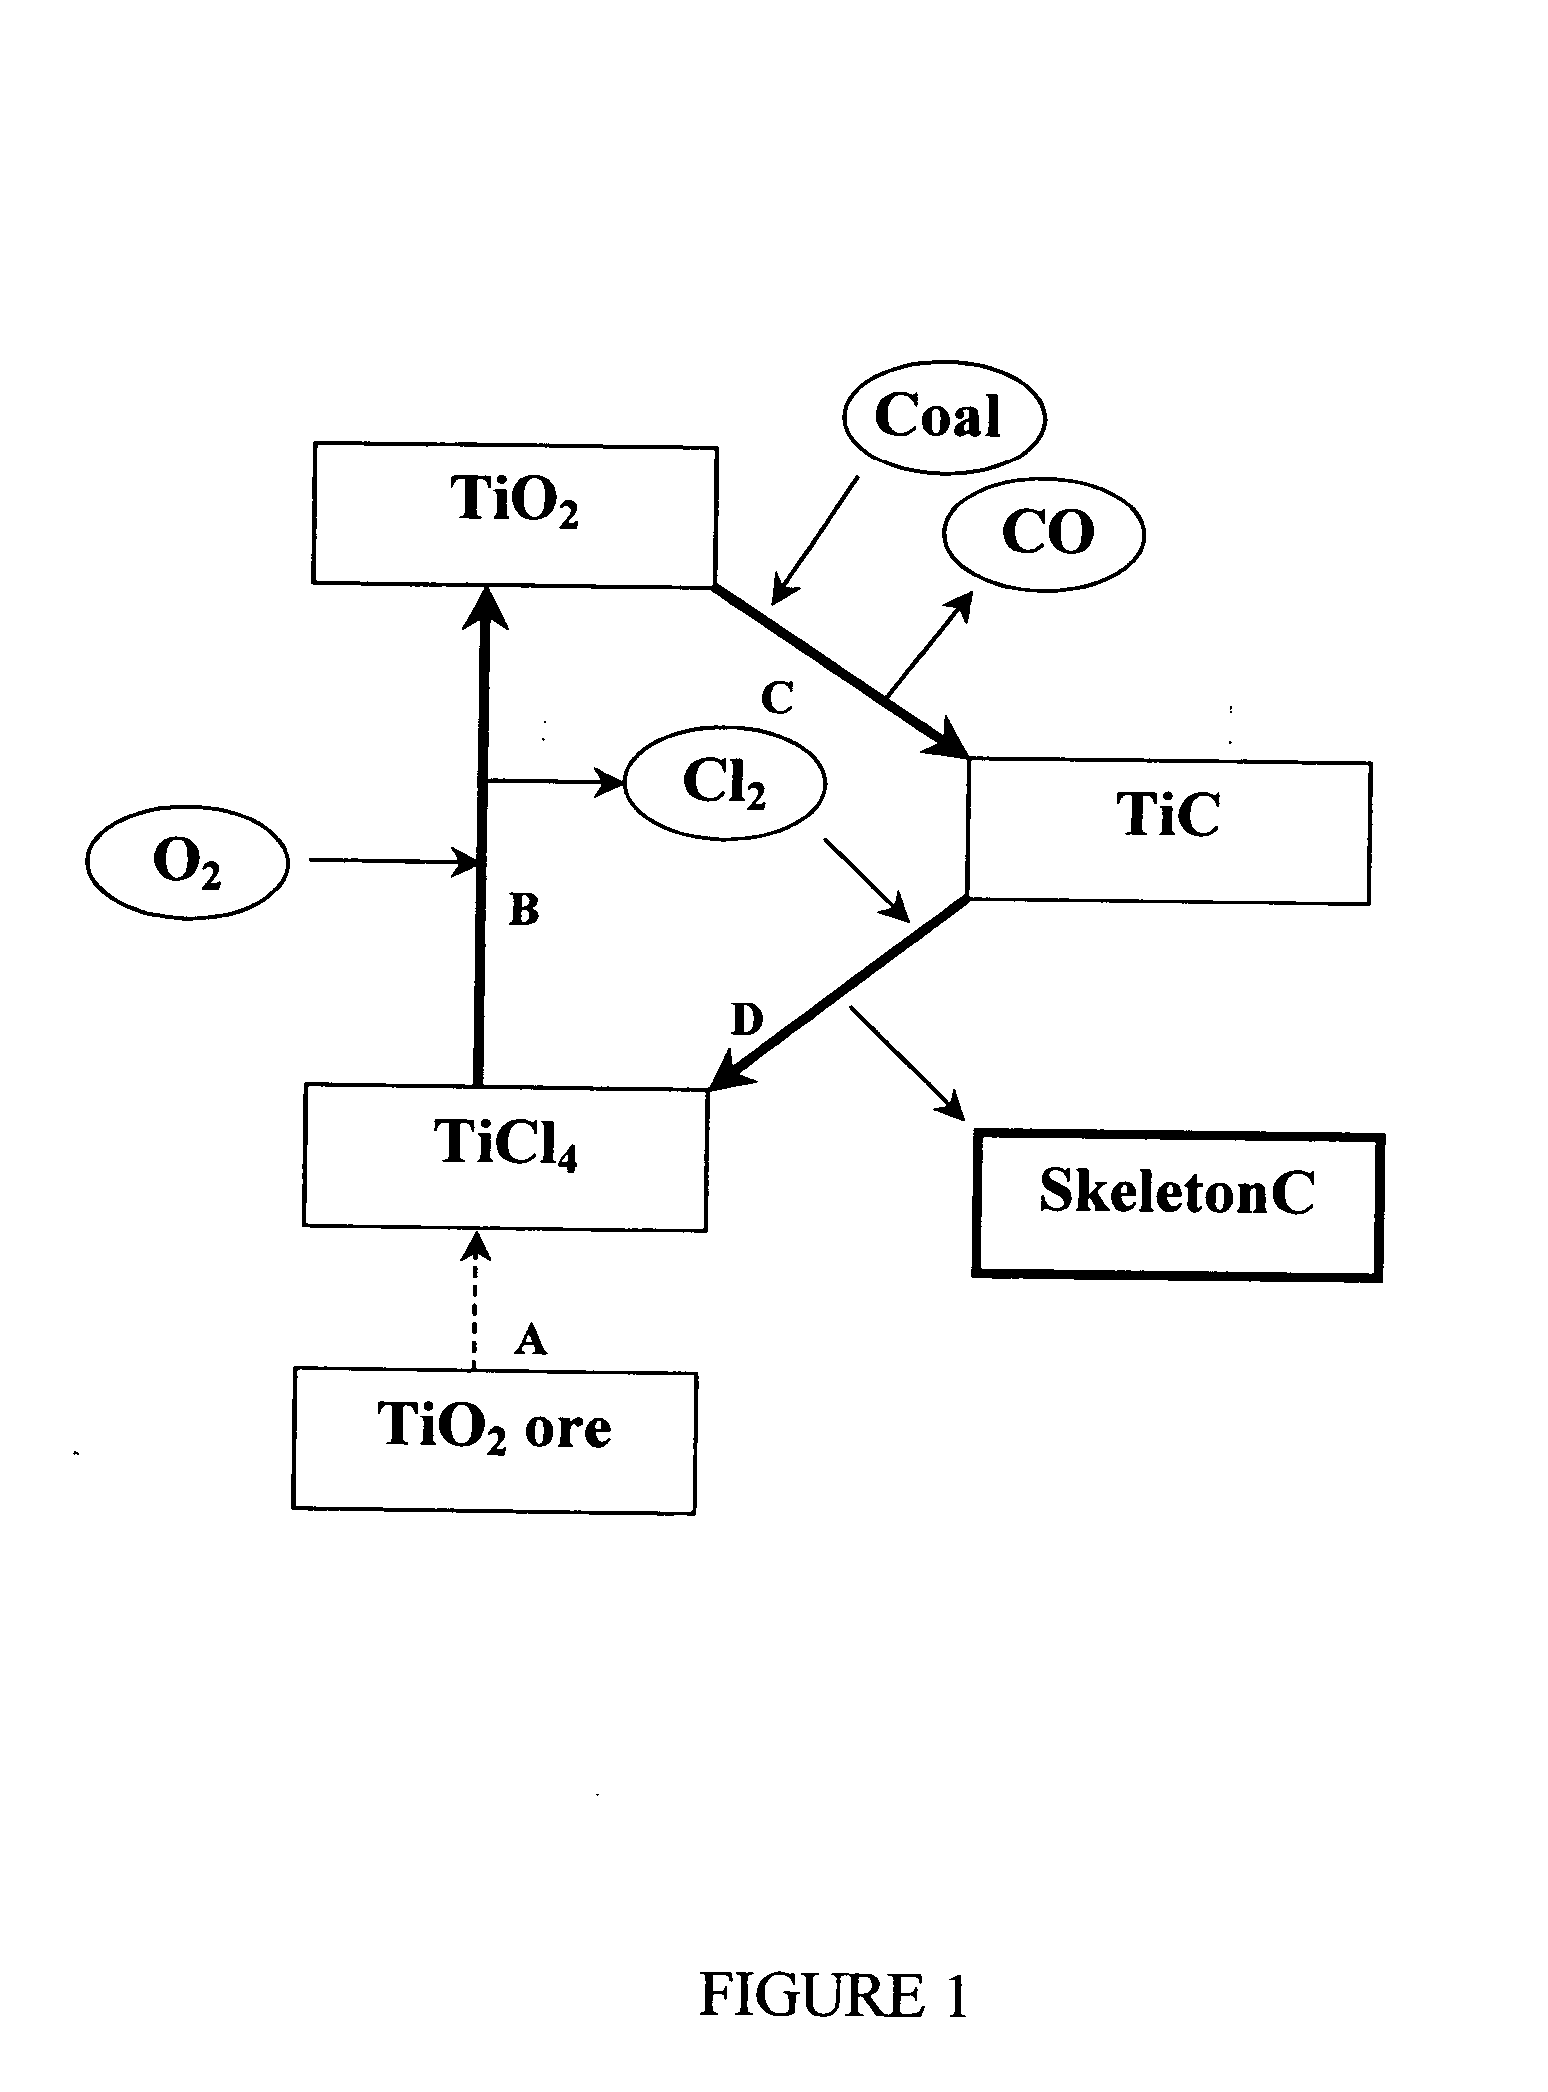 Method for manufacturing the nanoporous skeletonC material